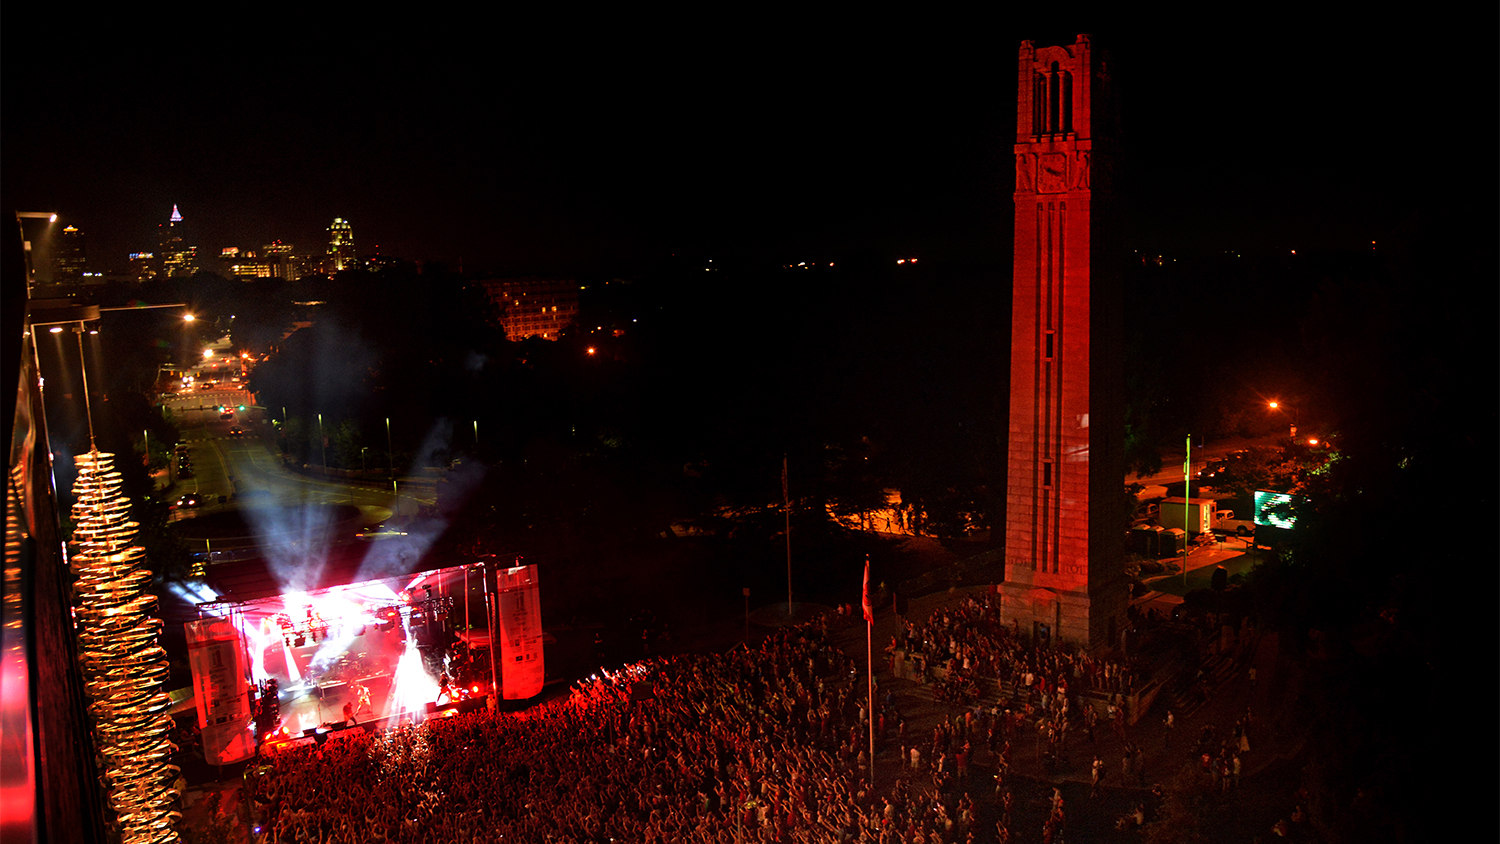 Looking down at the Belltower, which is illuminated red with a concert taking place on Hillsborough Street at night